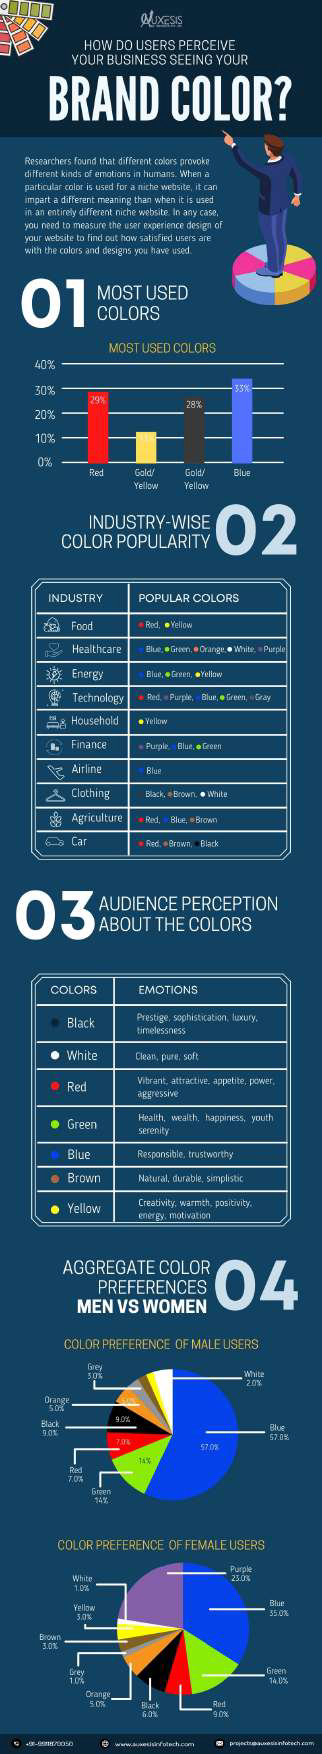 business brand colors infographic